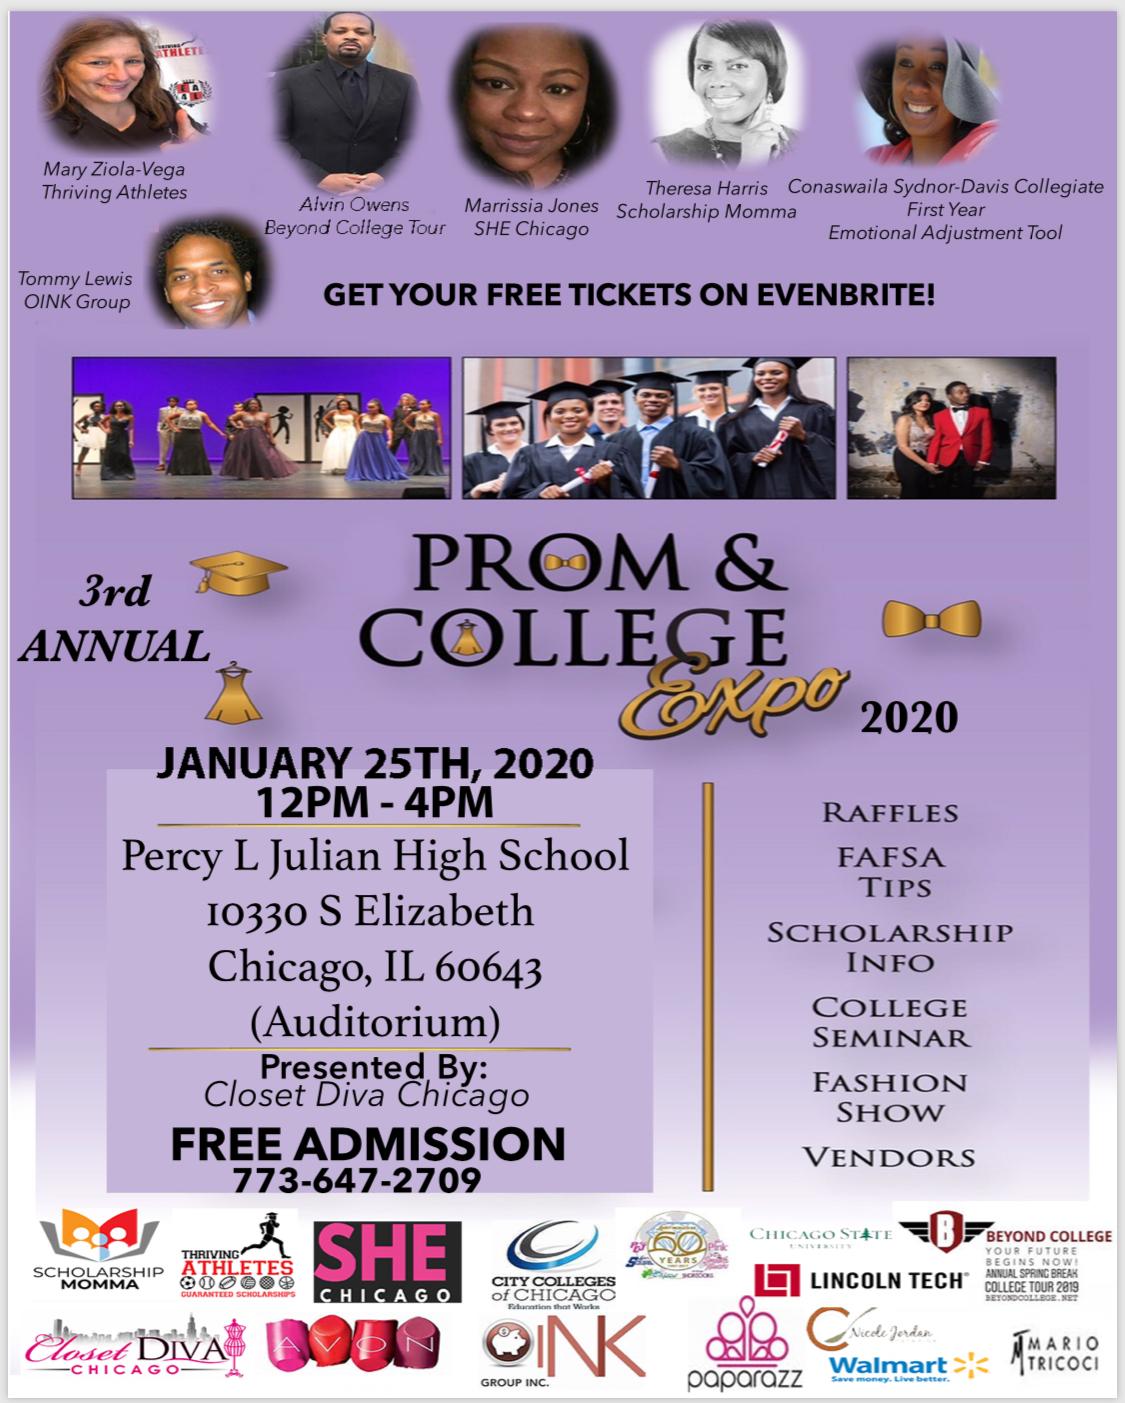 3rd ANNUAL PROM & COLLEGE EXPO JULIAN HIGH SCHOOL